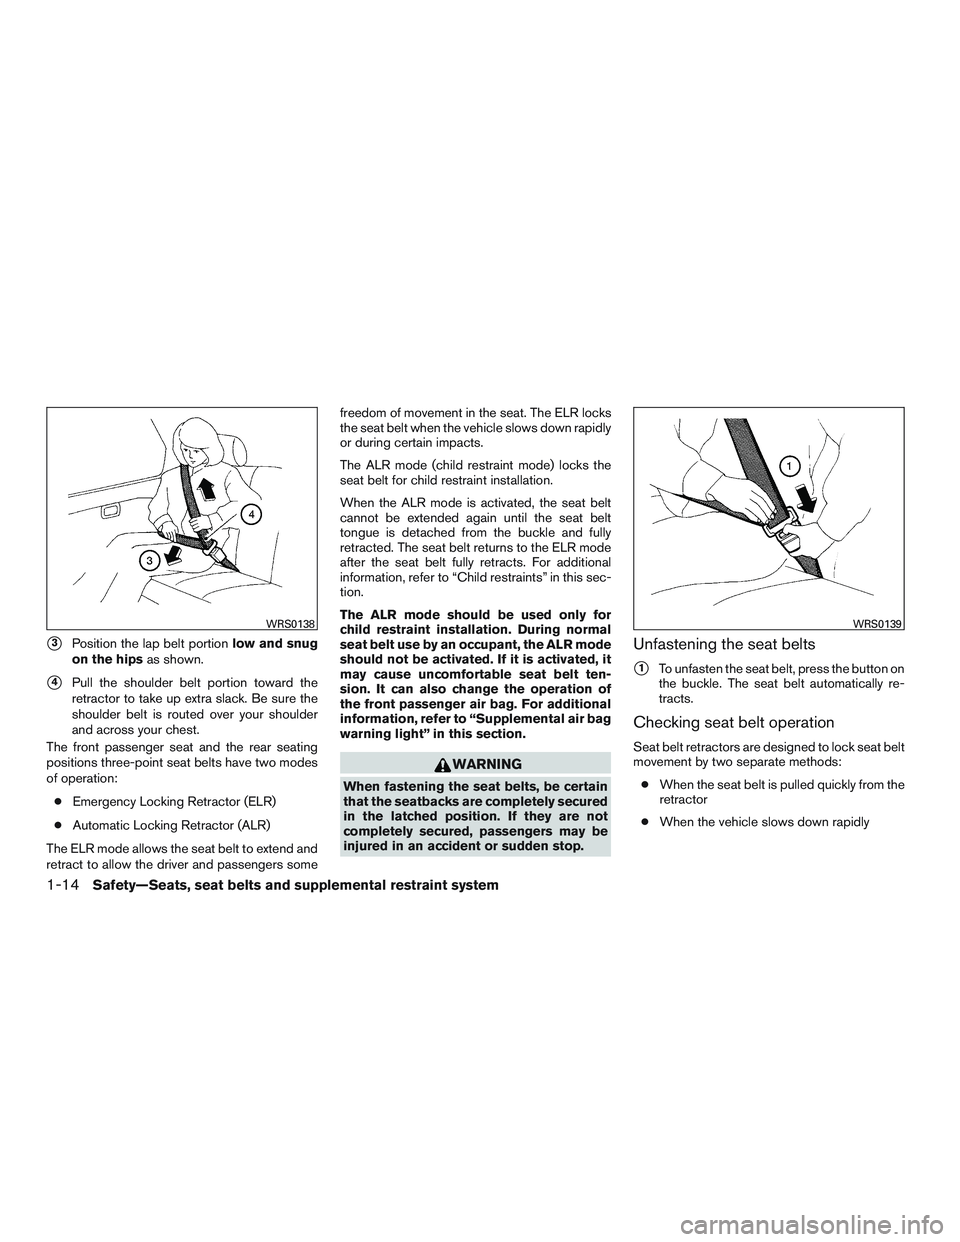 NISSAN MICRA 2010  Owners Manual 3Position the lap belt portionlow and snug
on the hips as shown.
4Pull the shoulder belt portion toward the
retractor to take up extra slack. Be sure the
shoulder belt is routed over your shoulder
a